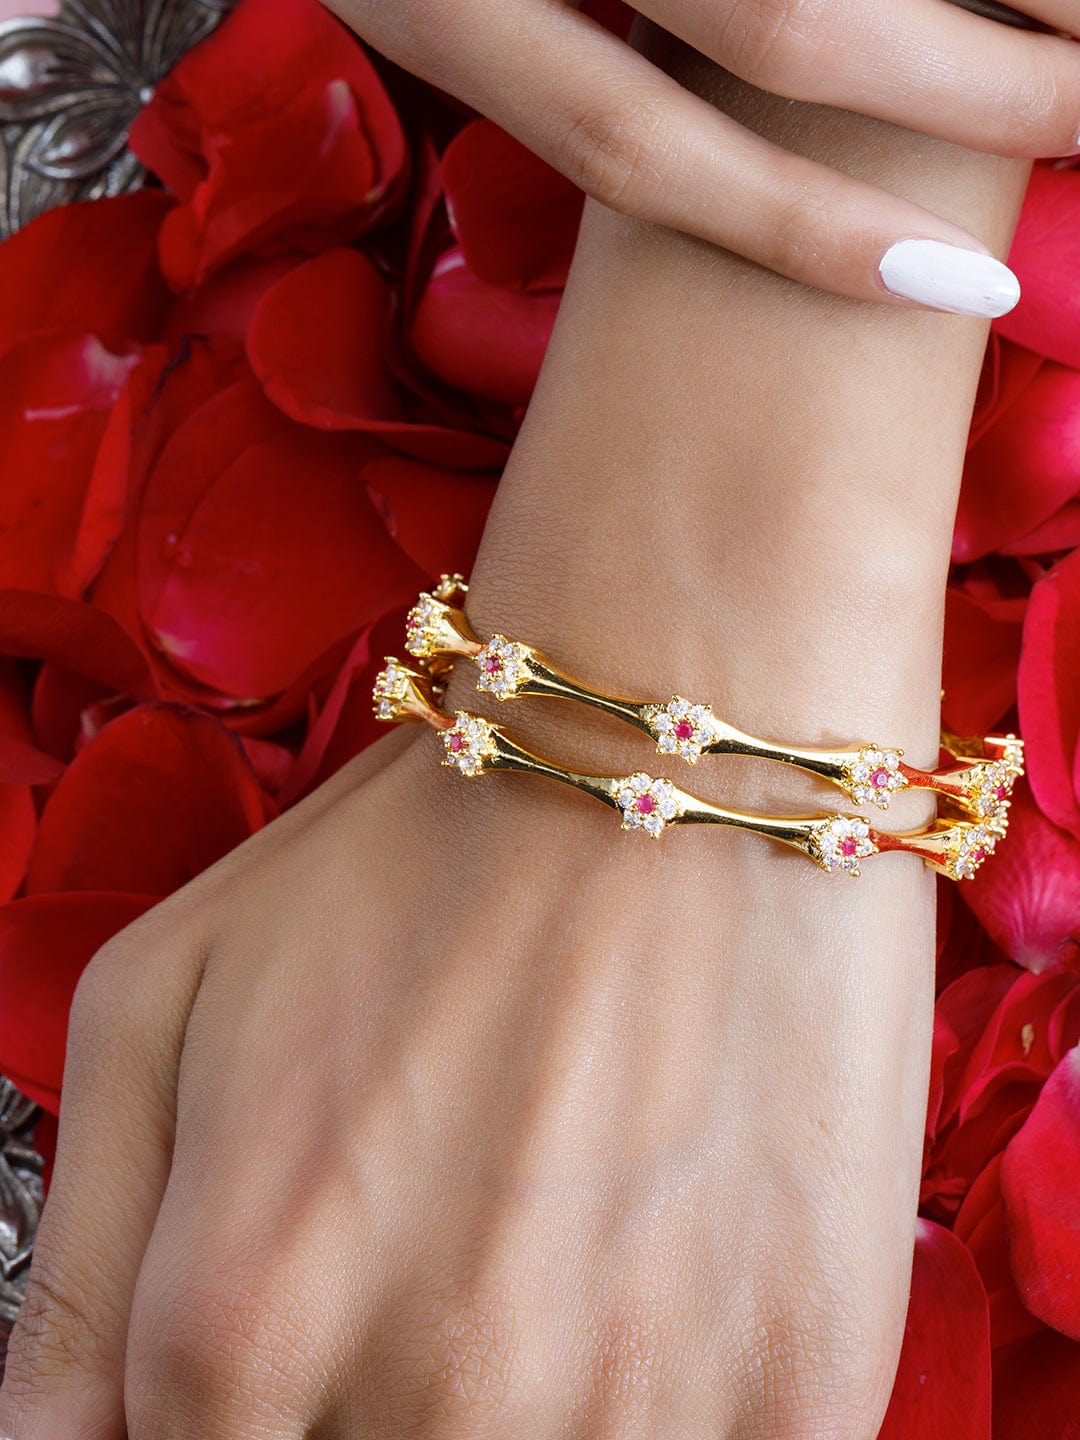 5 Bracelets and Bangles Everyone Must Own  The Caratlane